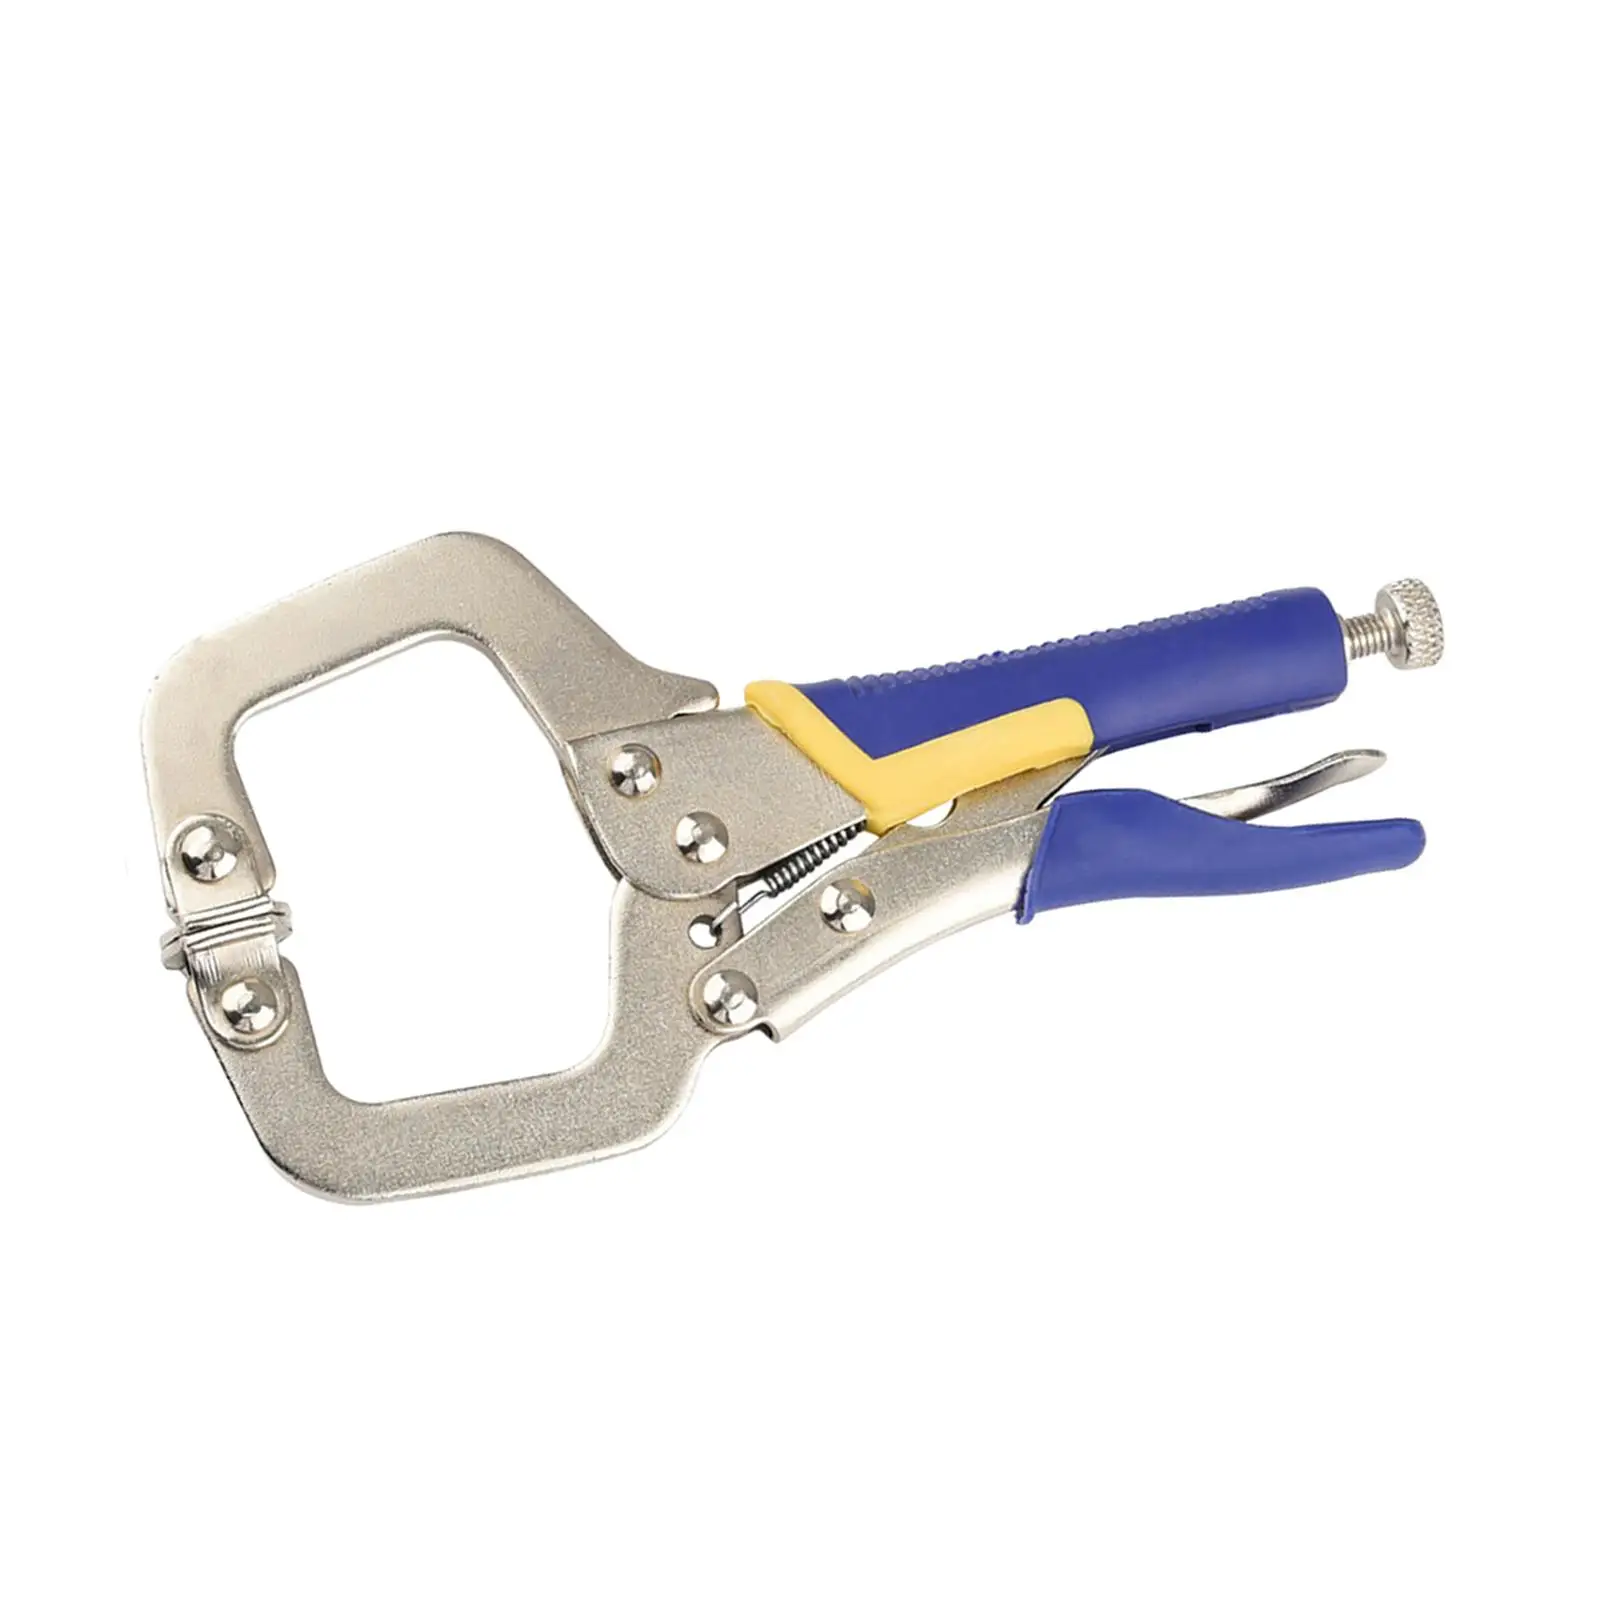 Locking C Clamp Heavy Duty, Adjustable Opening Face C Clamp, Locking Plier Tool for Craftsmen Carpentry Home Welding